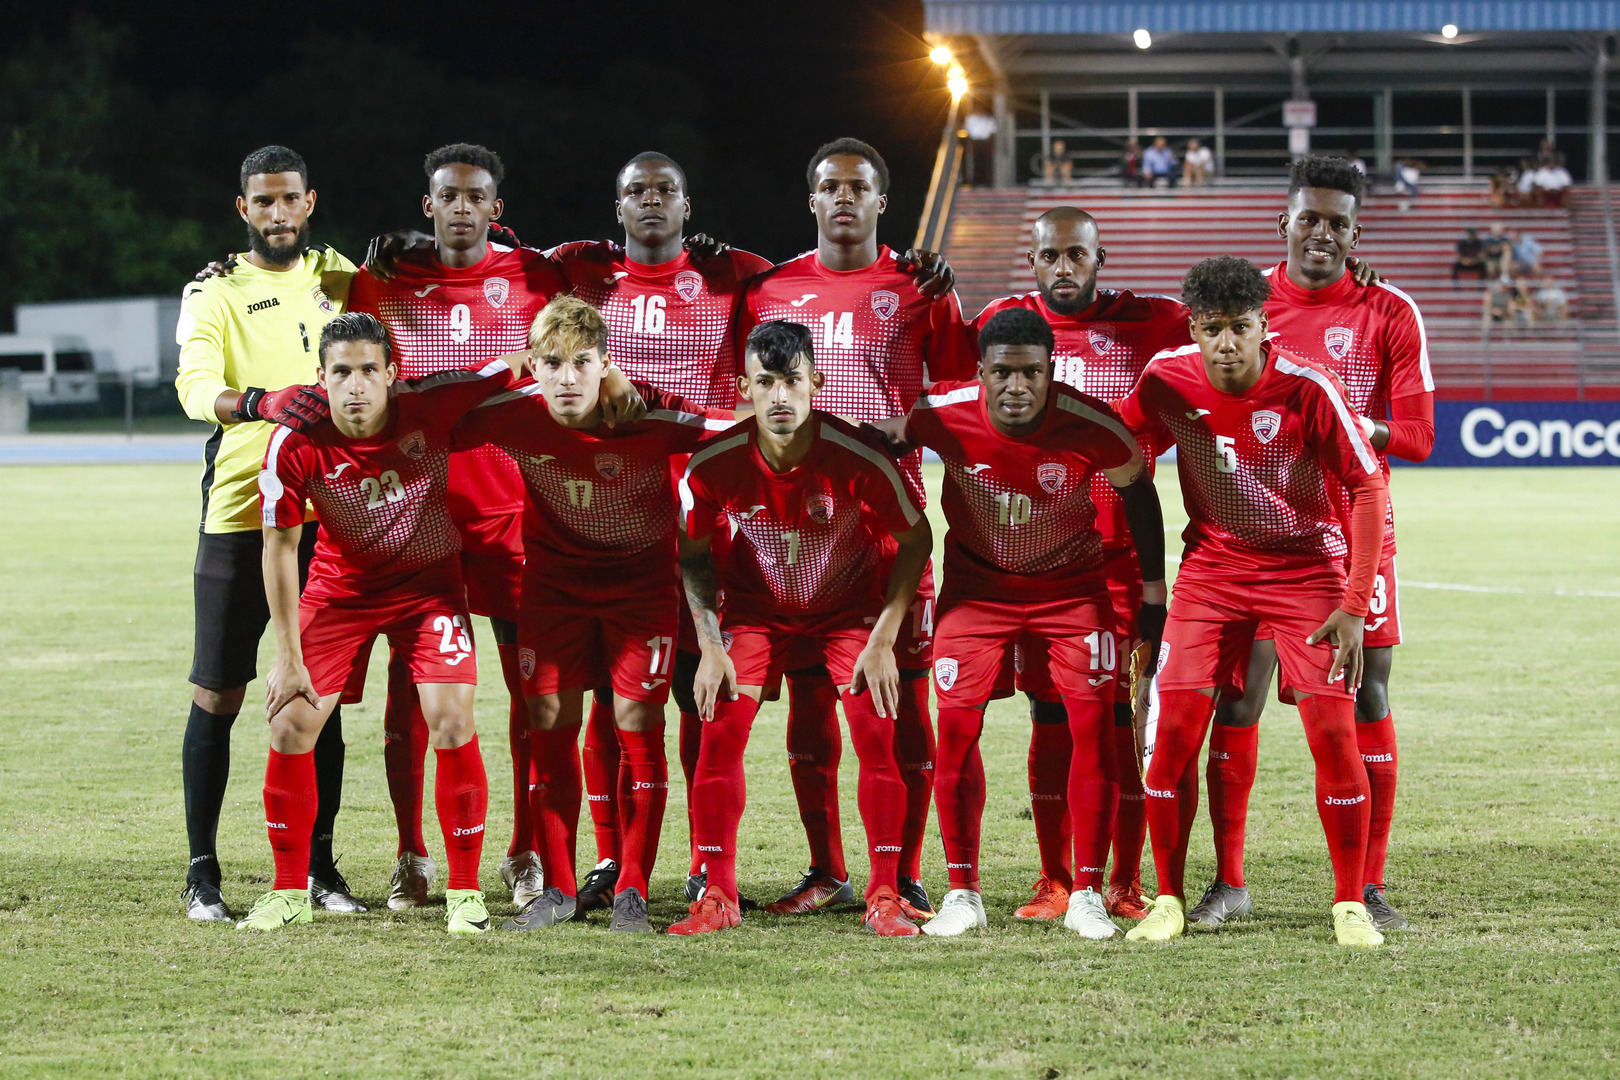 Cuba goal: Qualify for World Cup in the next decade